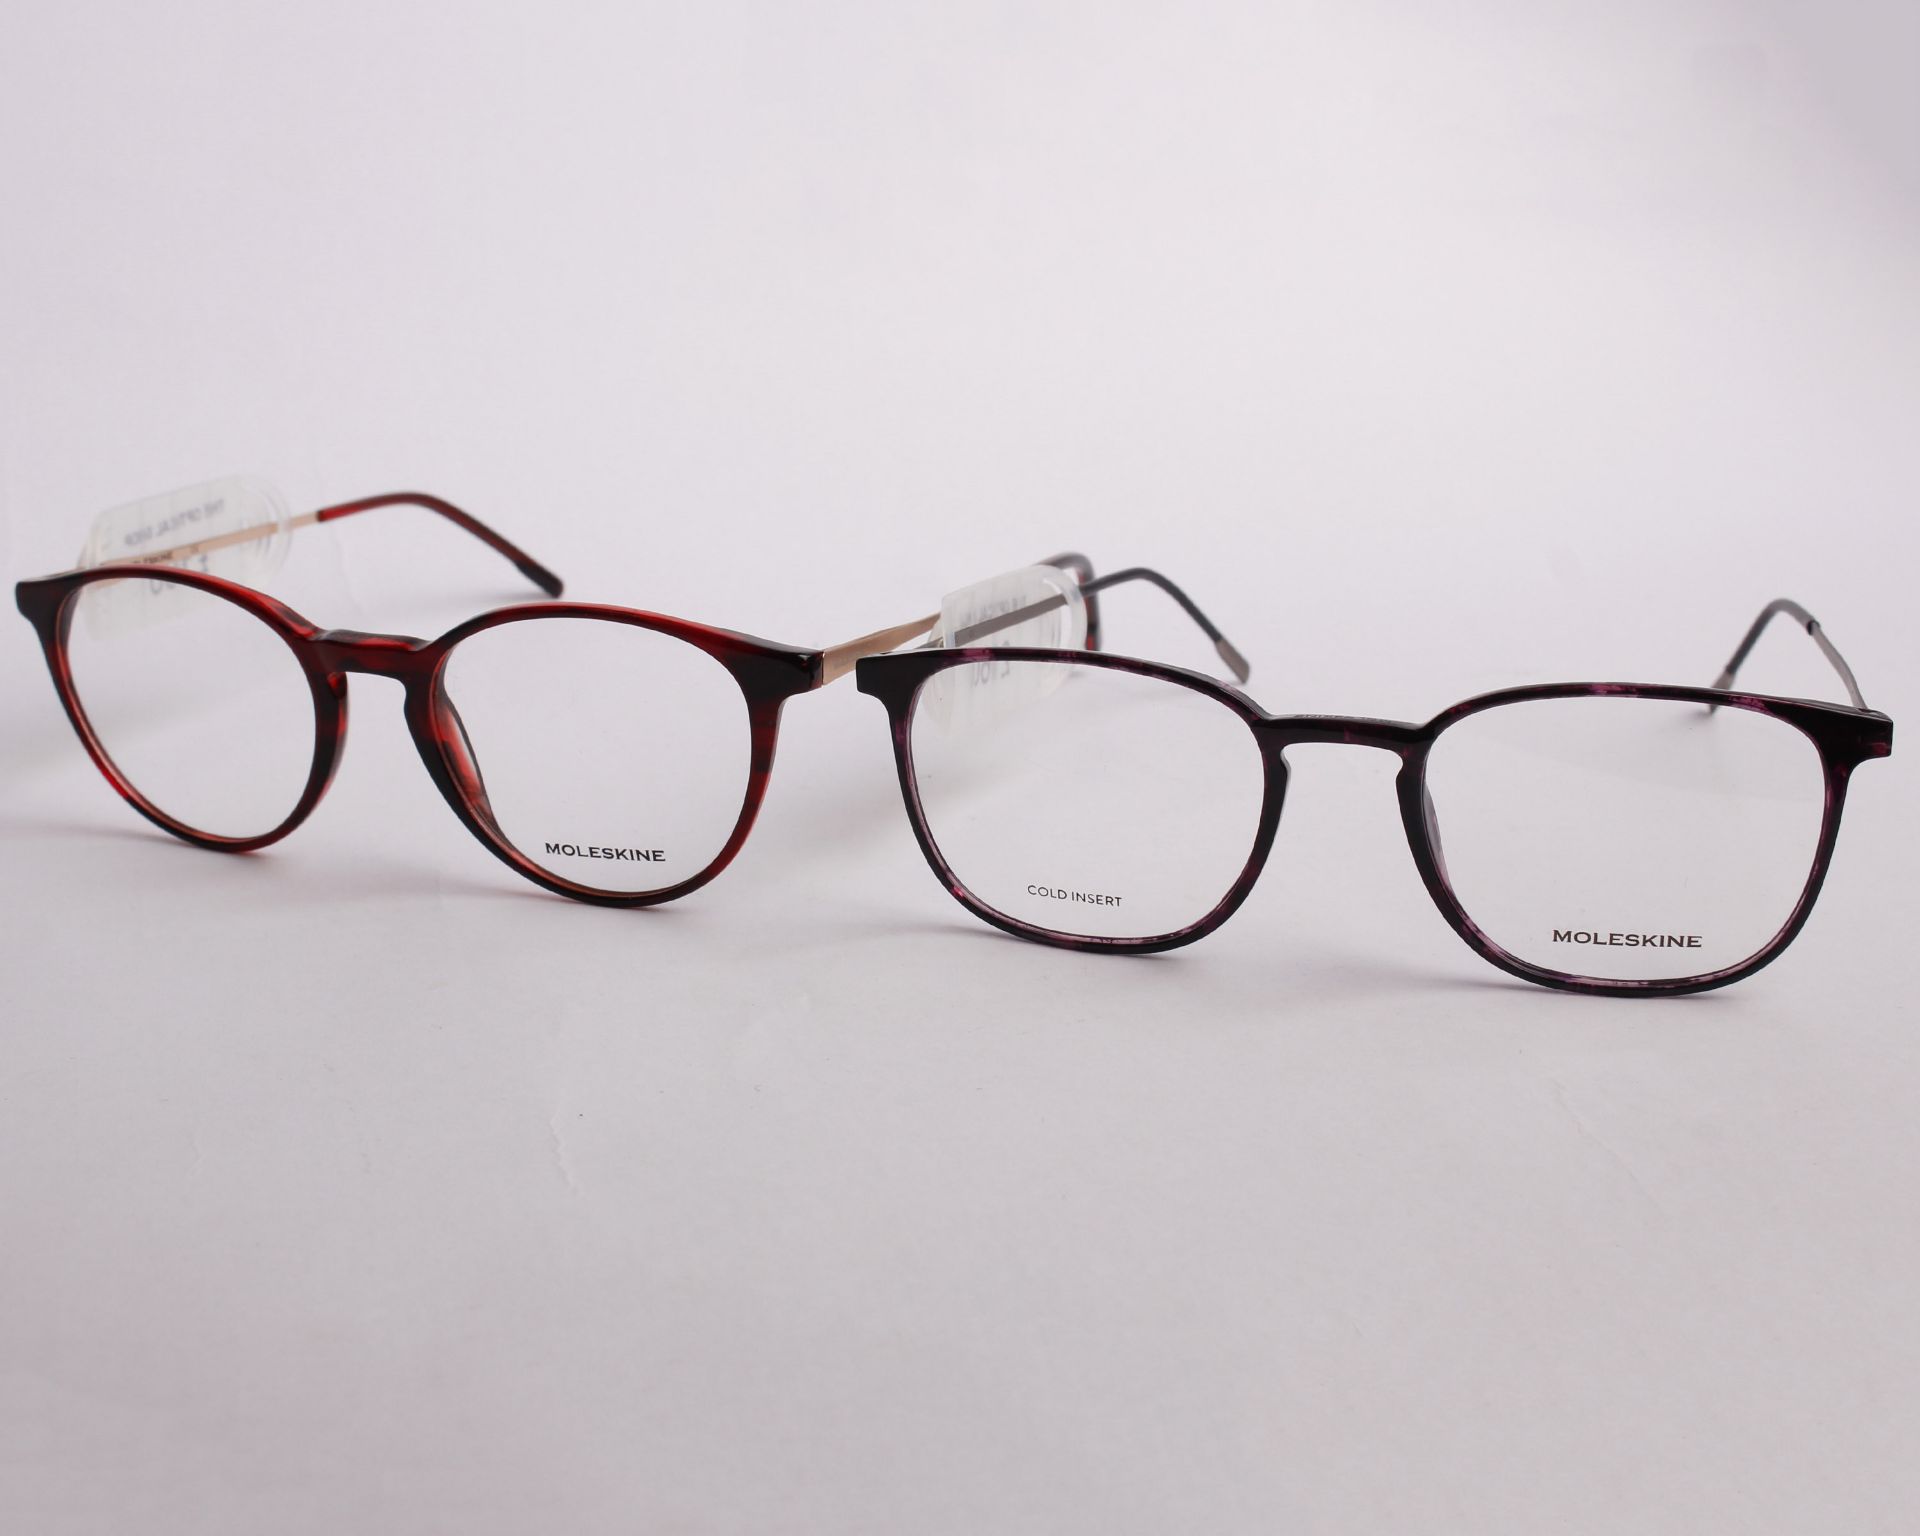 Two pairs of as new Moleskine glasses frames with clear glass (RRP £160 each). - Image 2 of 3